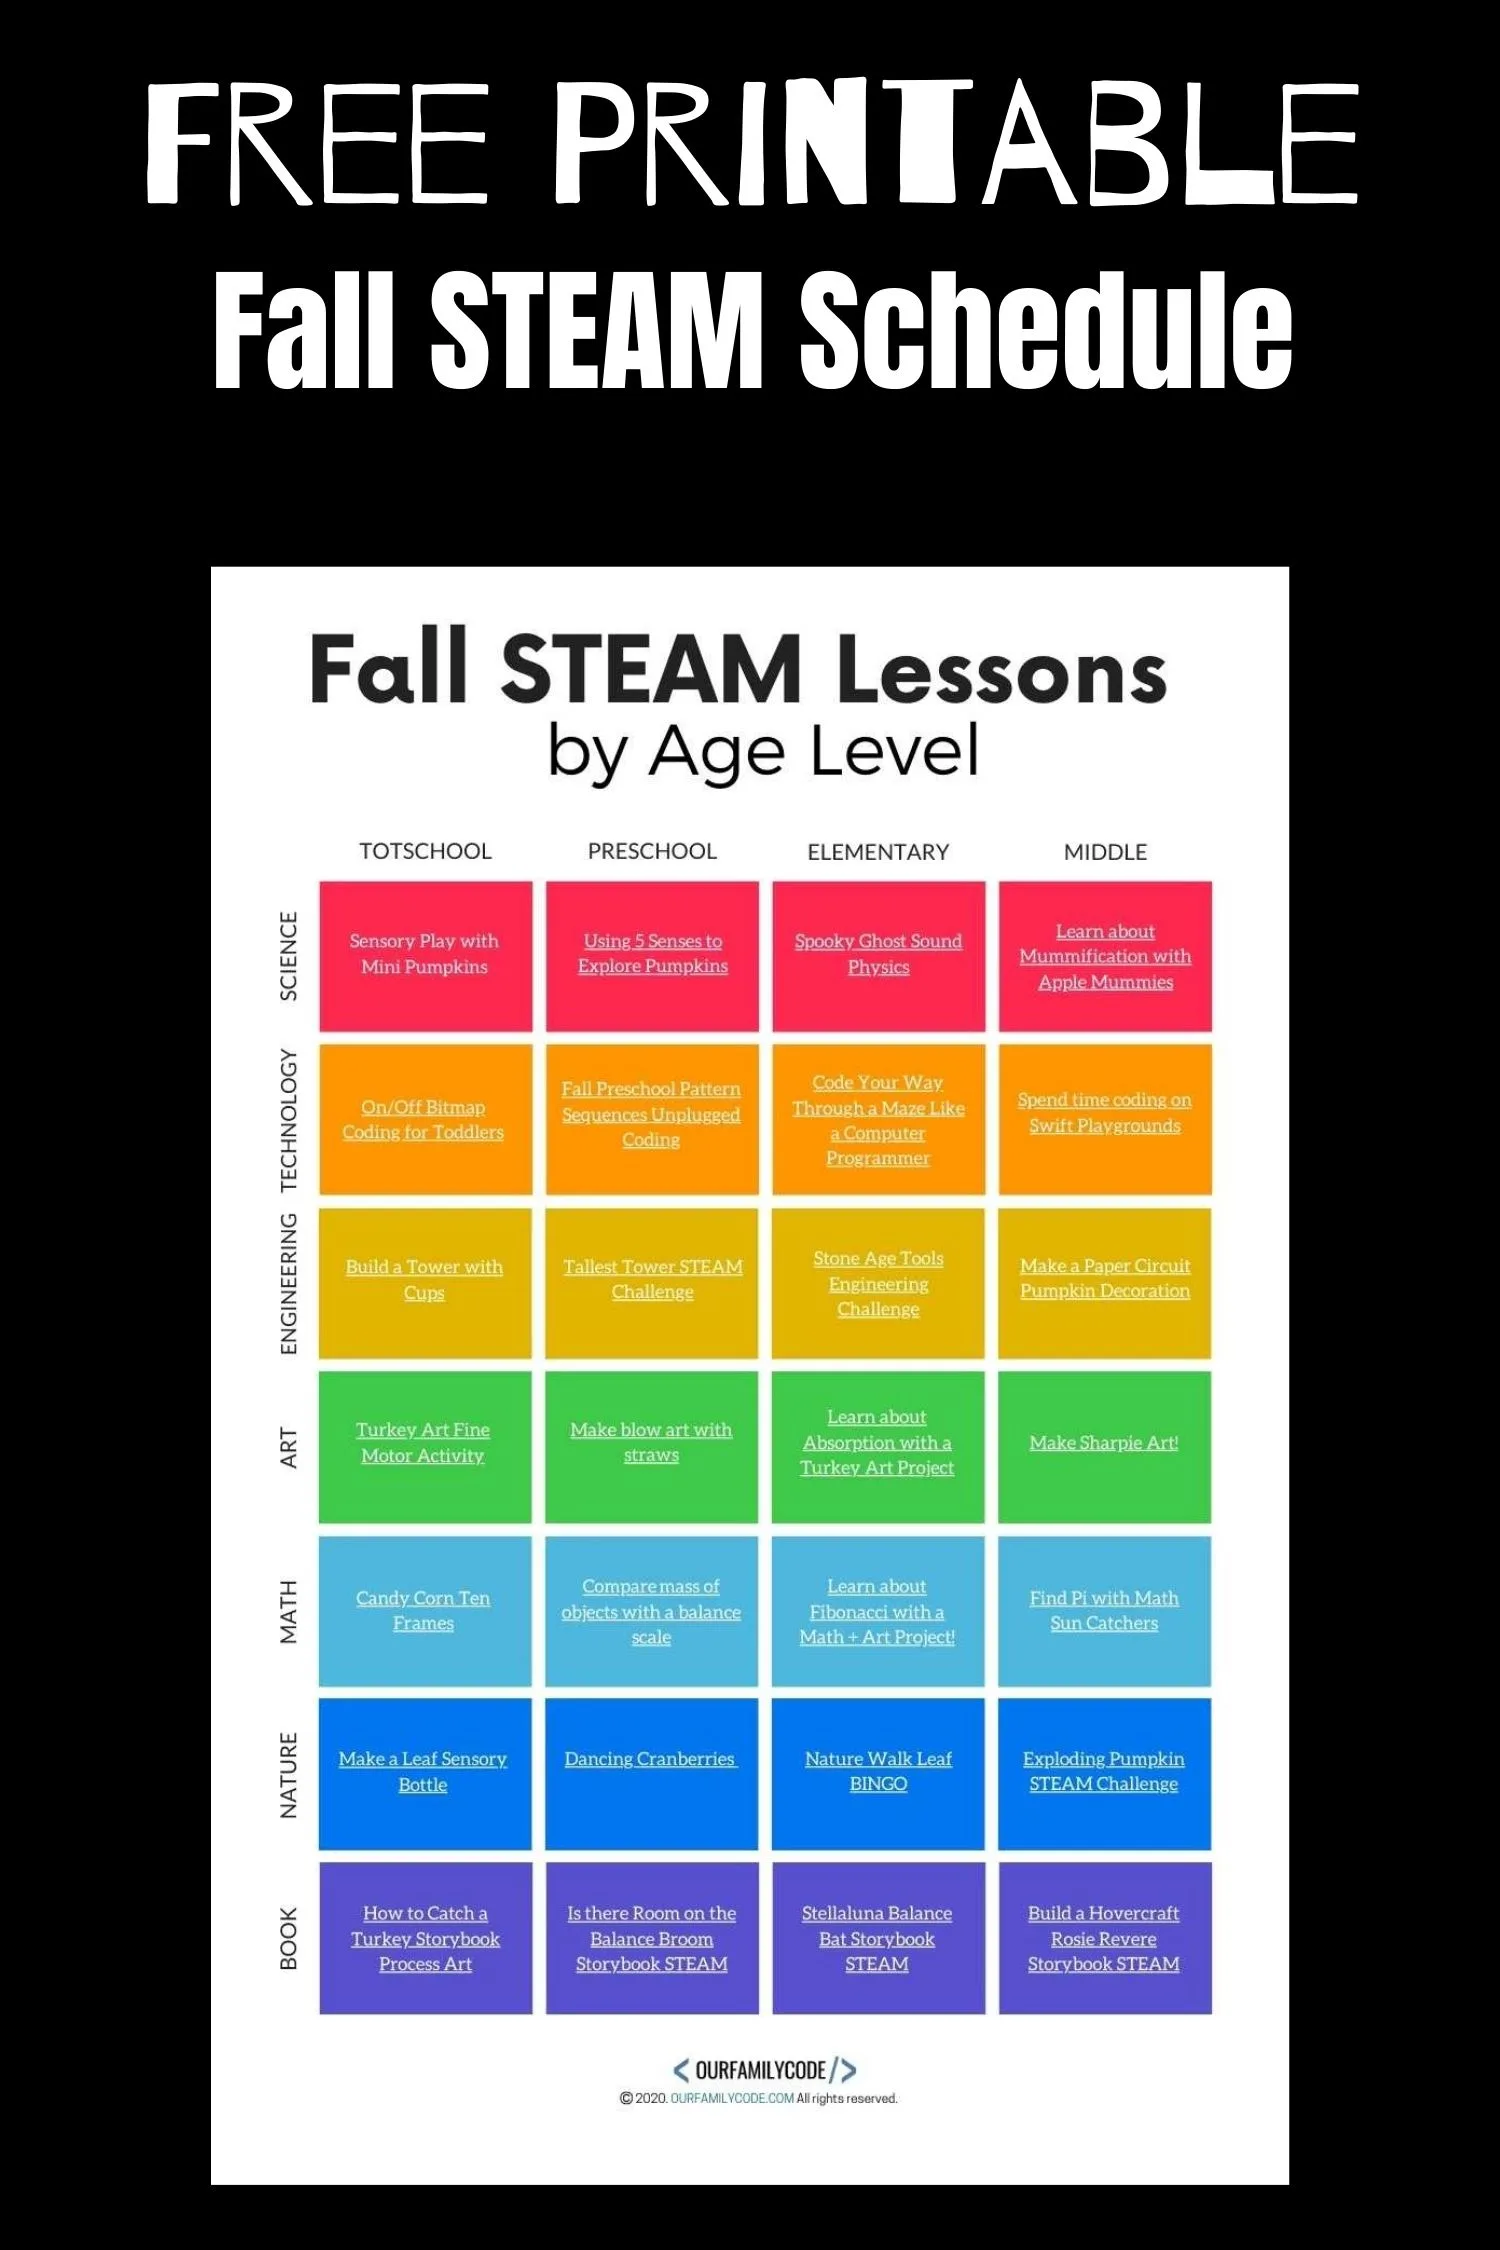 Free Printable fall steam schedule